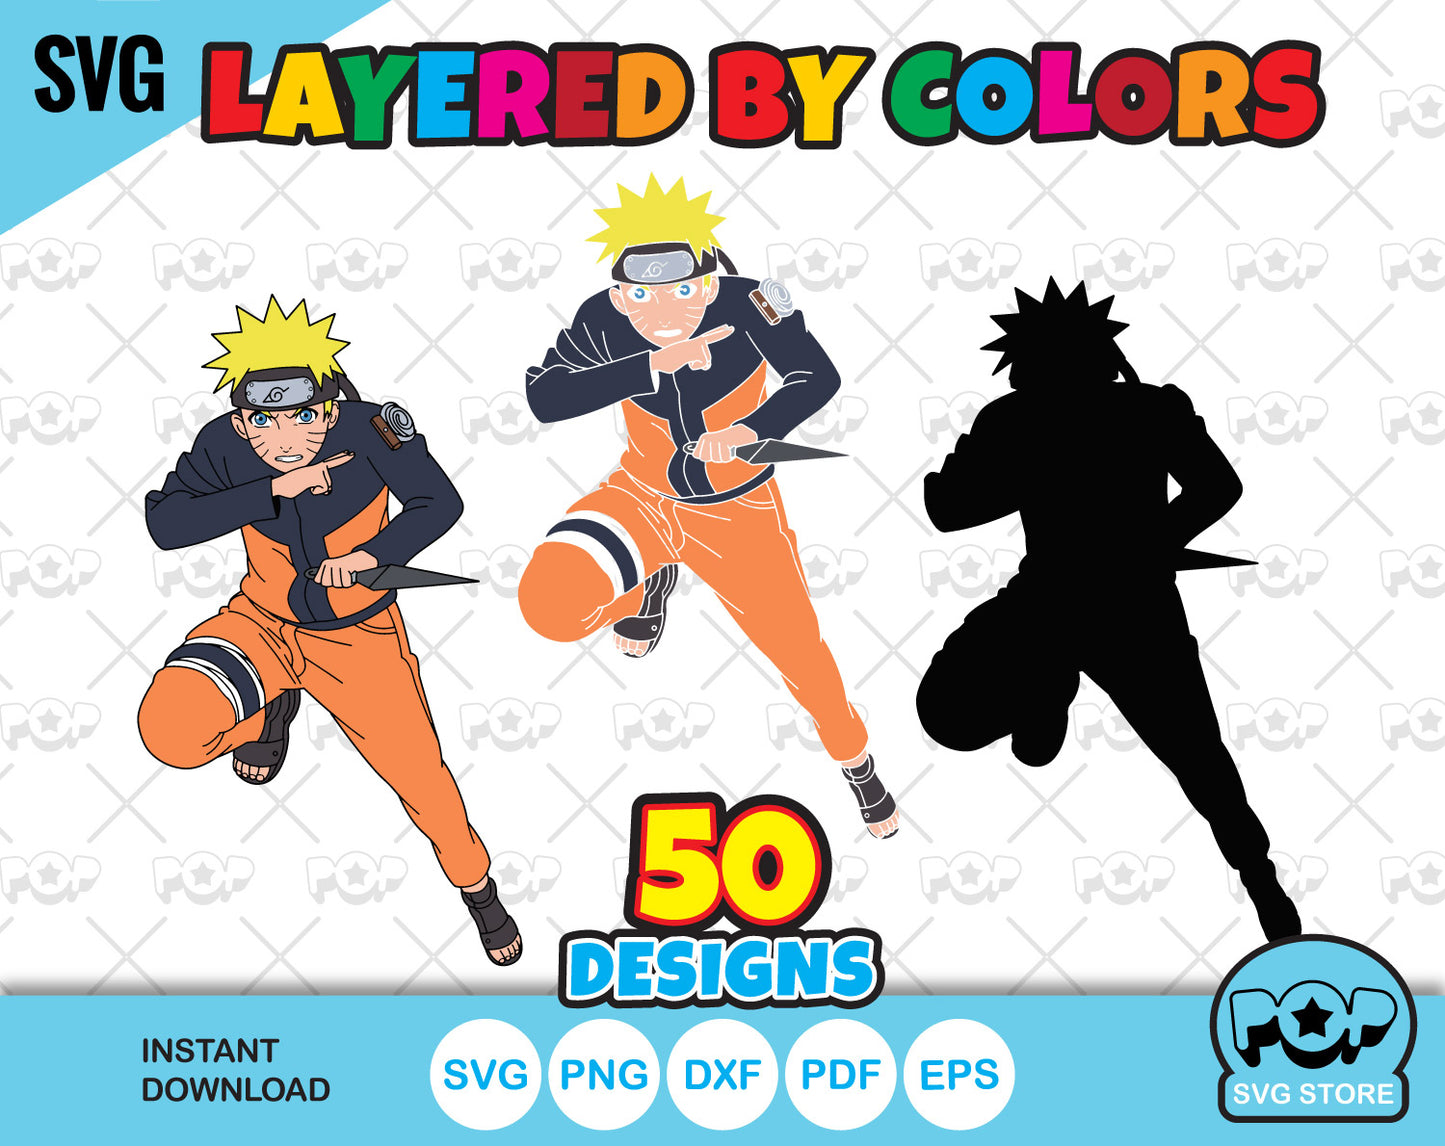 Naruto clipart set, Naruto SVG cut files for Cricut / Silhouette, SVG, PNG, DXF, instant download